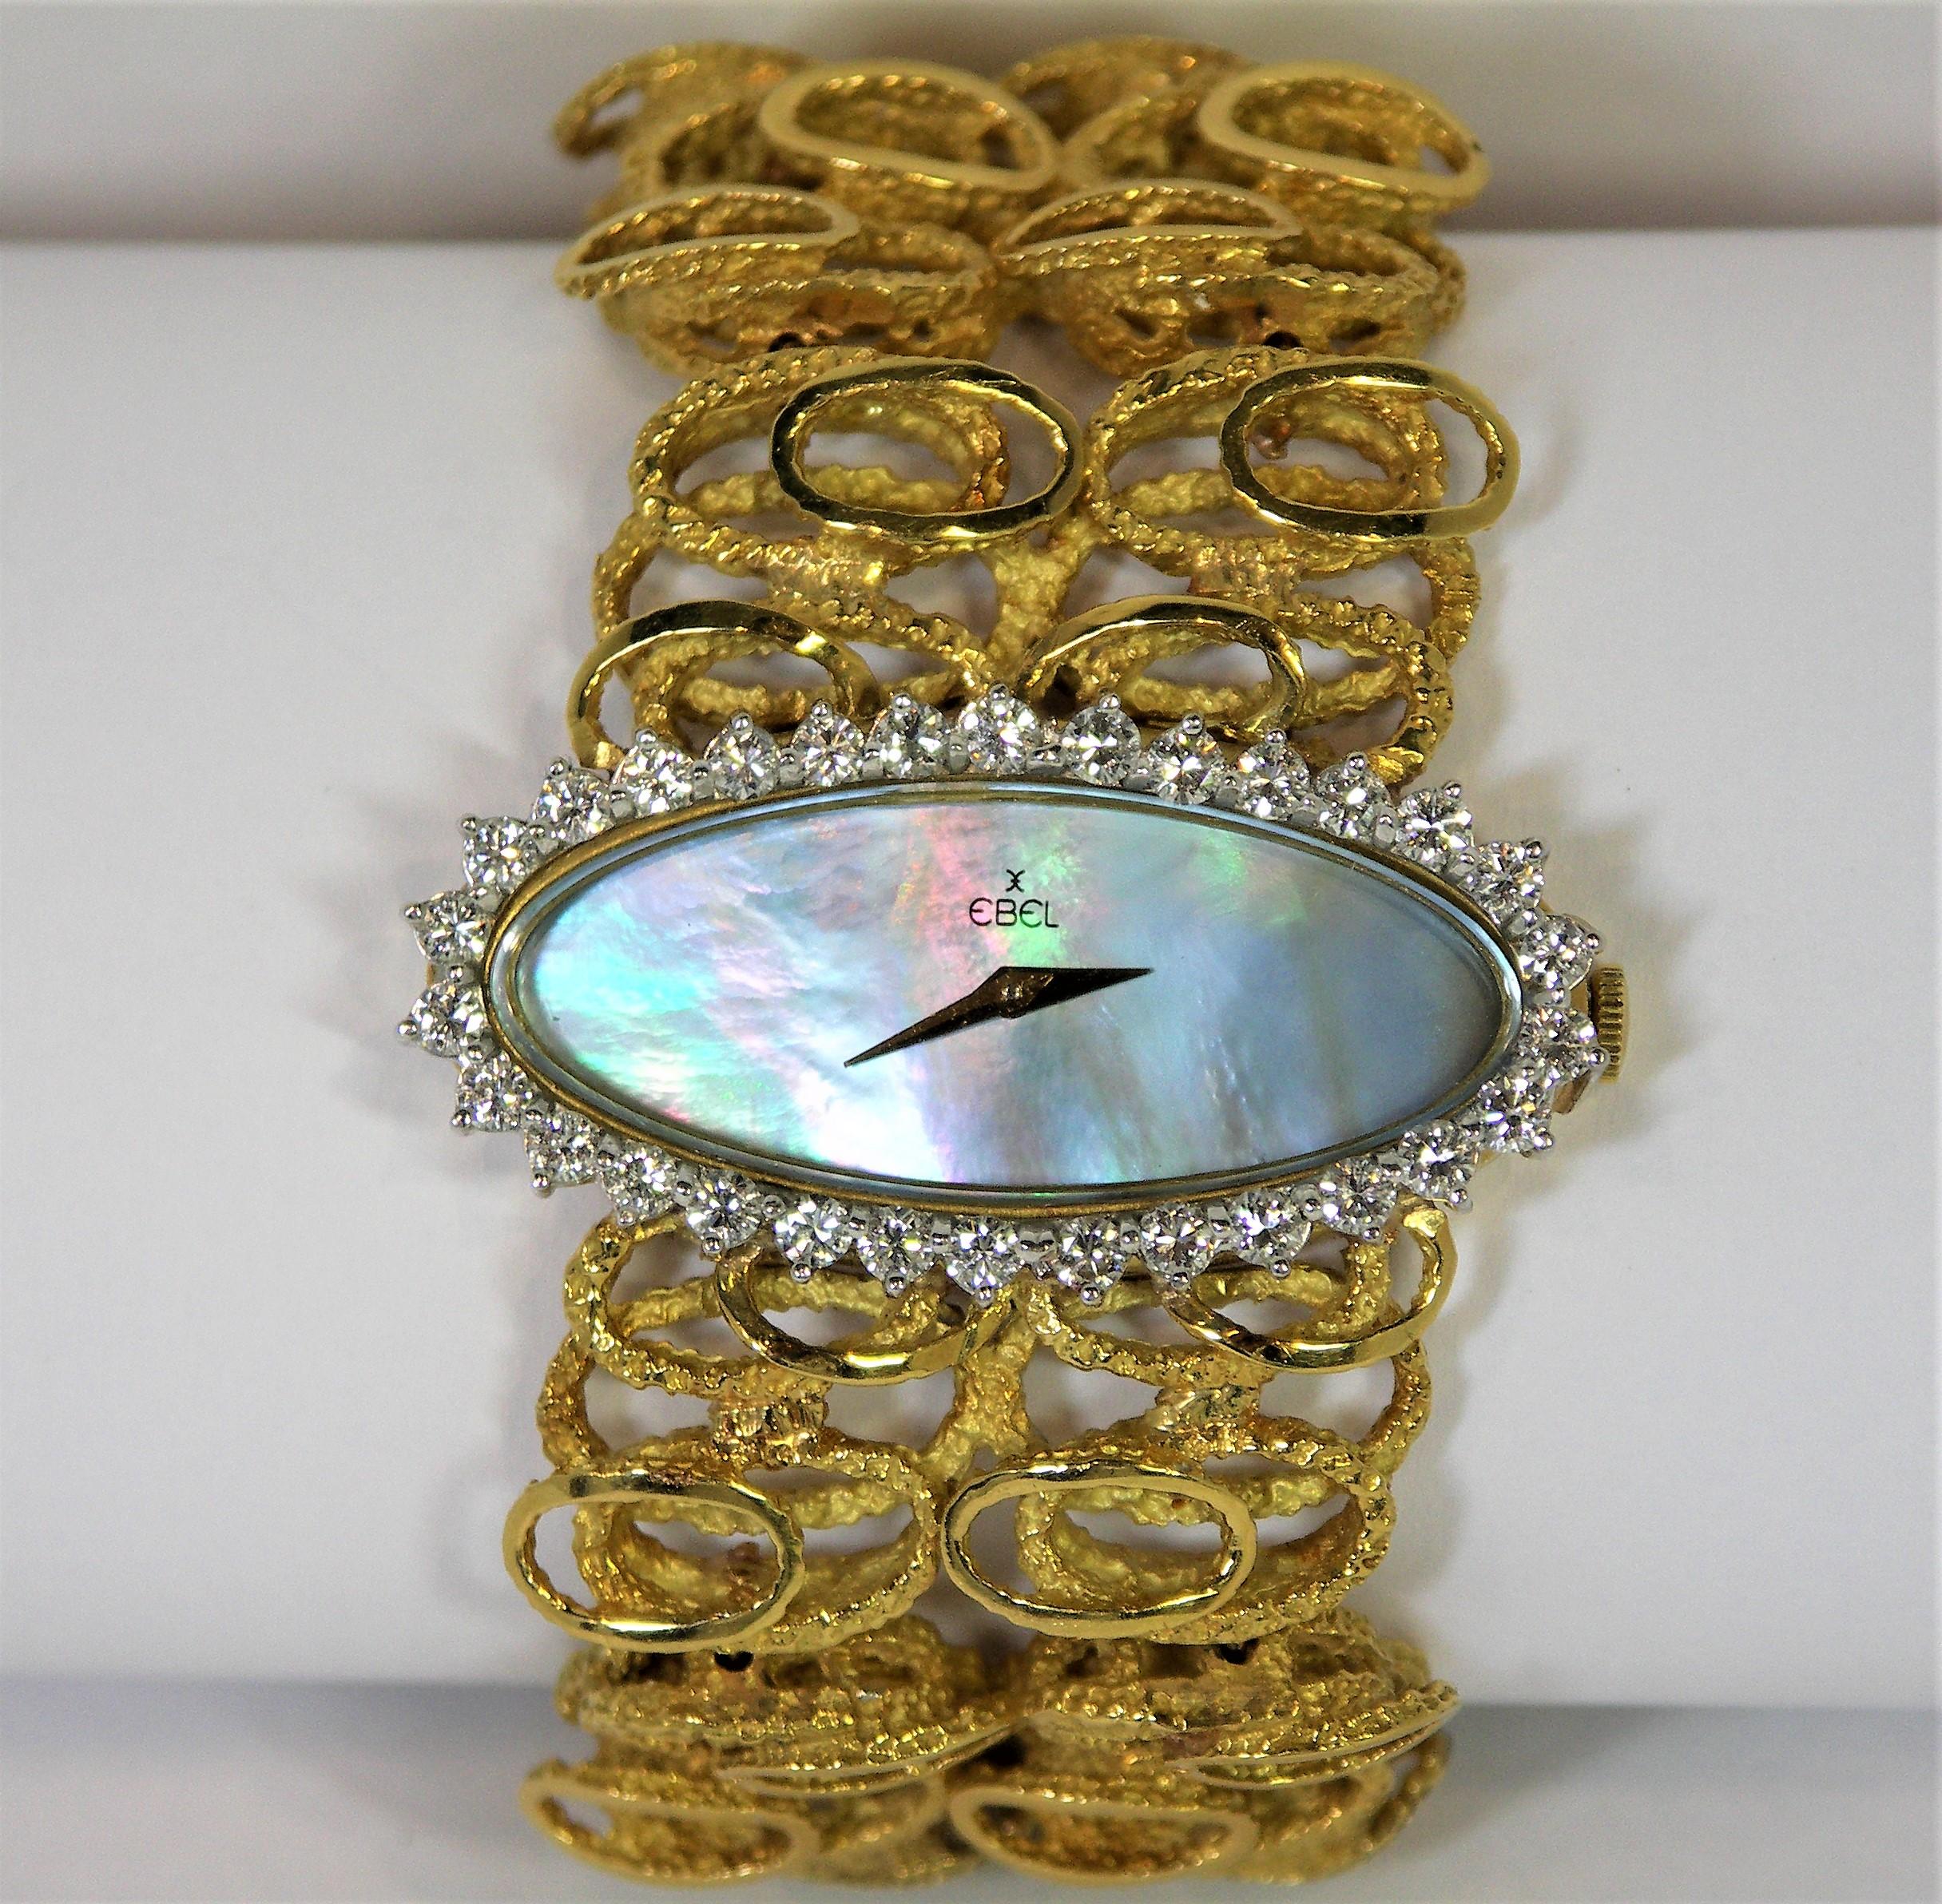 This vintage, 18K Yellow Gold ladies Ebel Watch has a huge, oval shaped
Mother of Pearl dial surrounded by 30 round brilliant cut diamonds weighing an approximate total of 3.0Ct of G Color and VS2 Clarity. The
watch including the diamond bezel